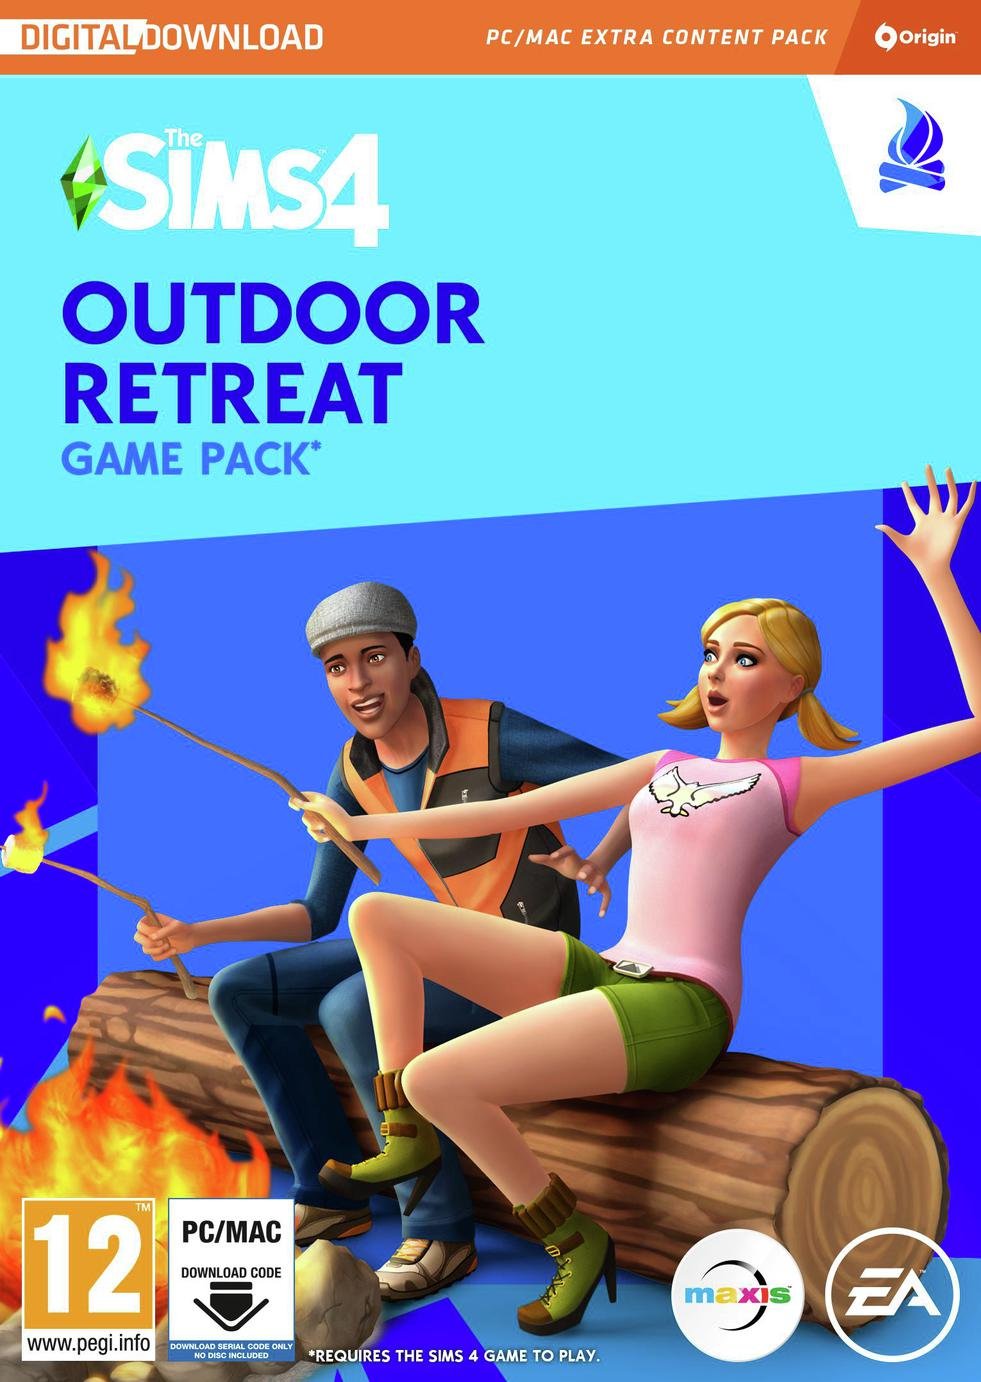 The Sims 4 Outdoor Retreat Game Pack PC Game